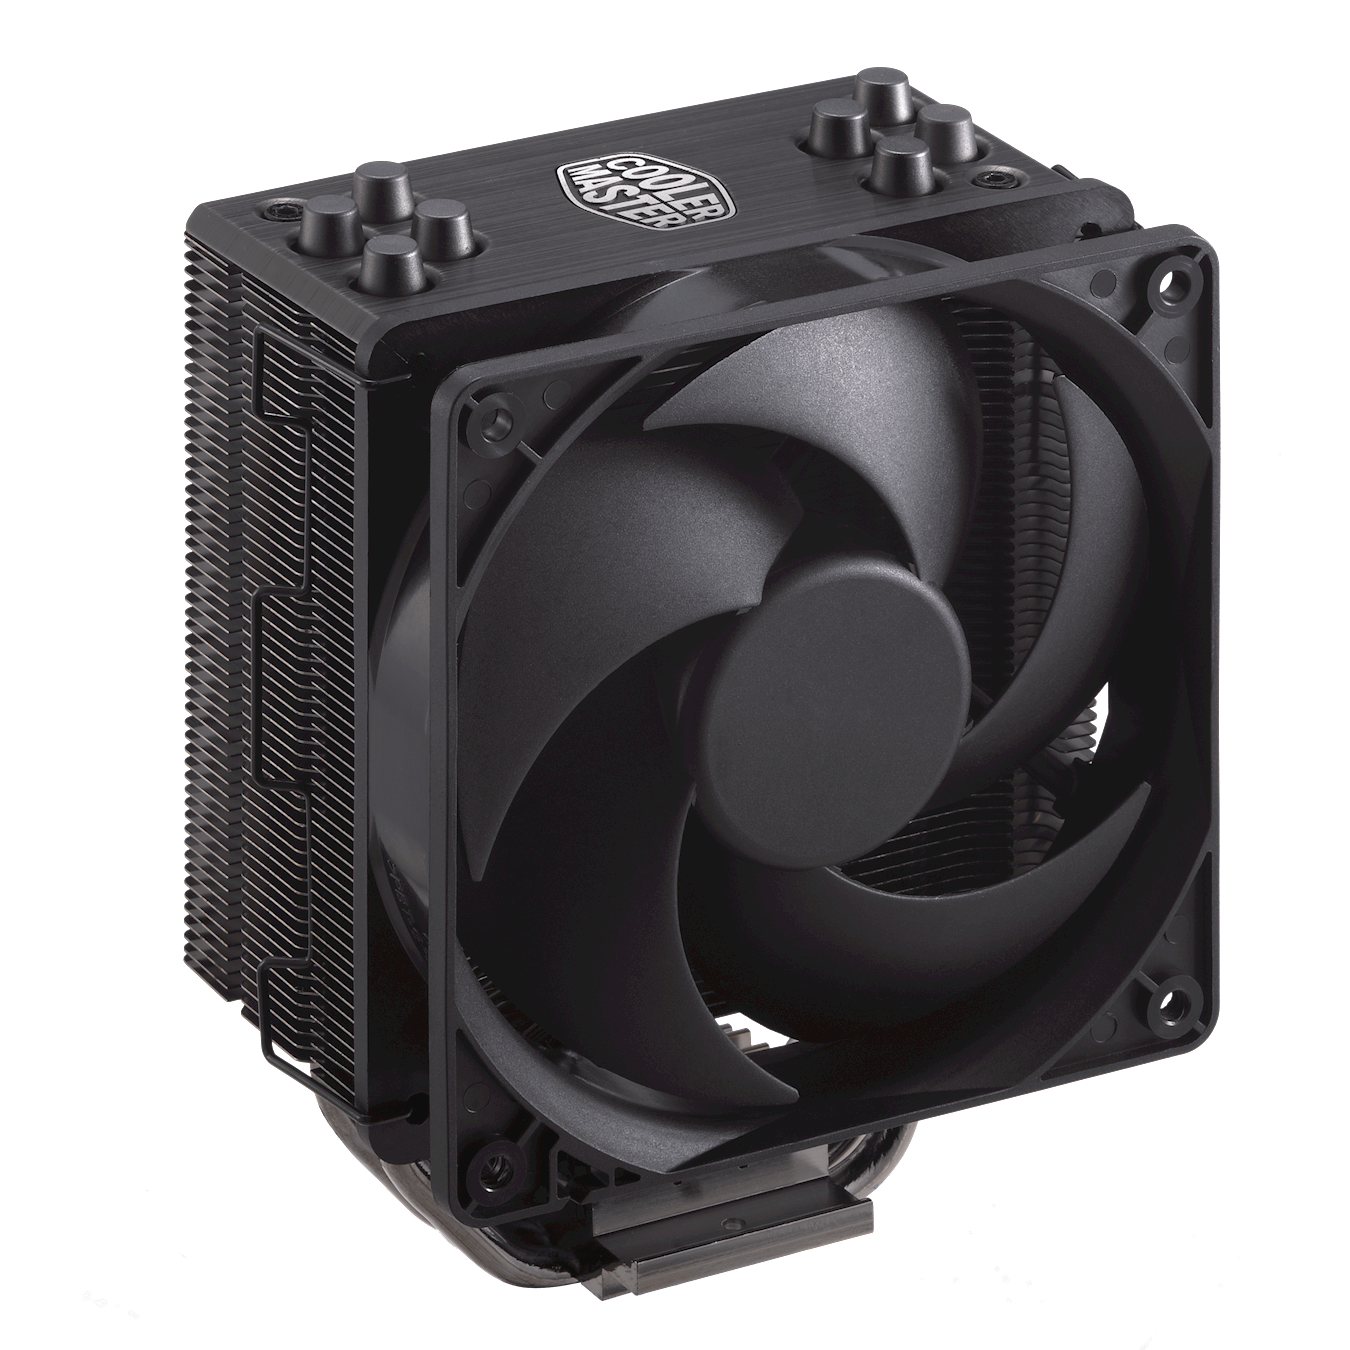 A Cooler Master Hyper 212 Black Edition CPU cooler is tilted slightly to the right.